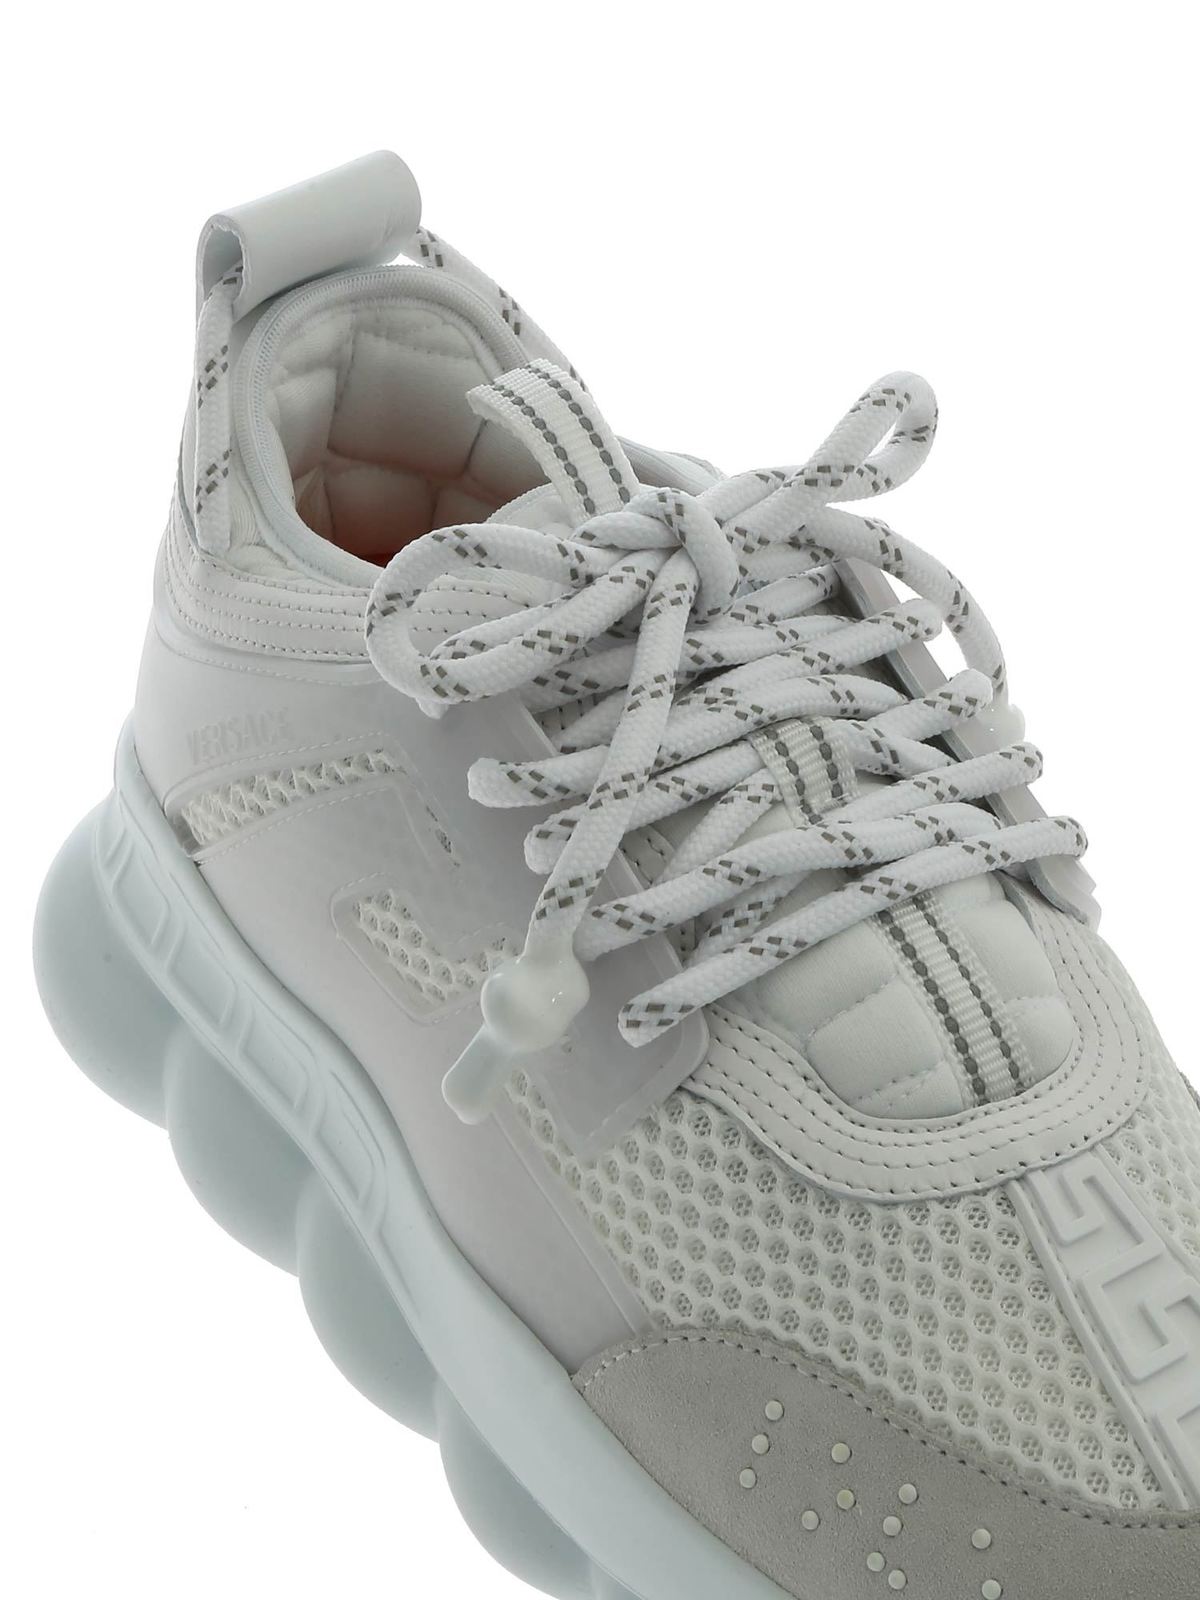 VERSACE: Chain Reaction sneakers in leather and mesh - White